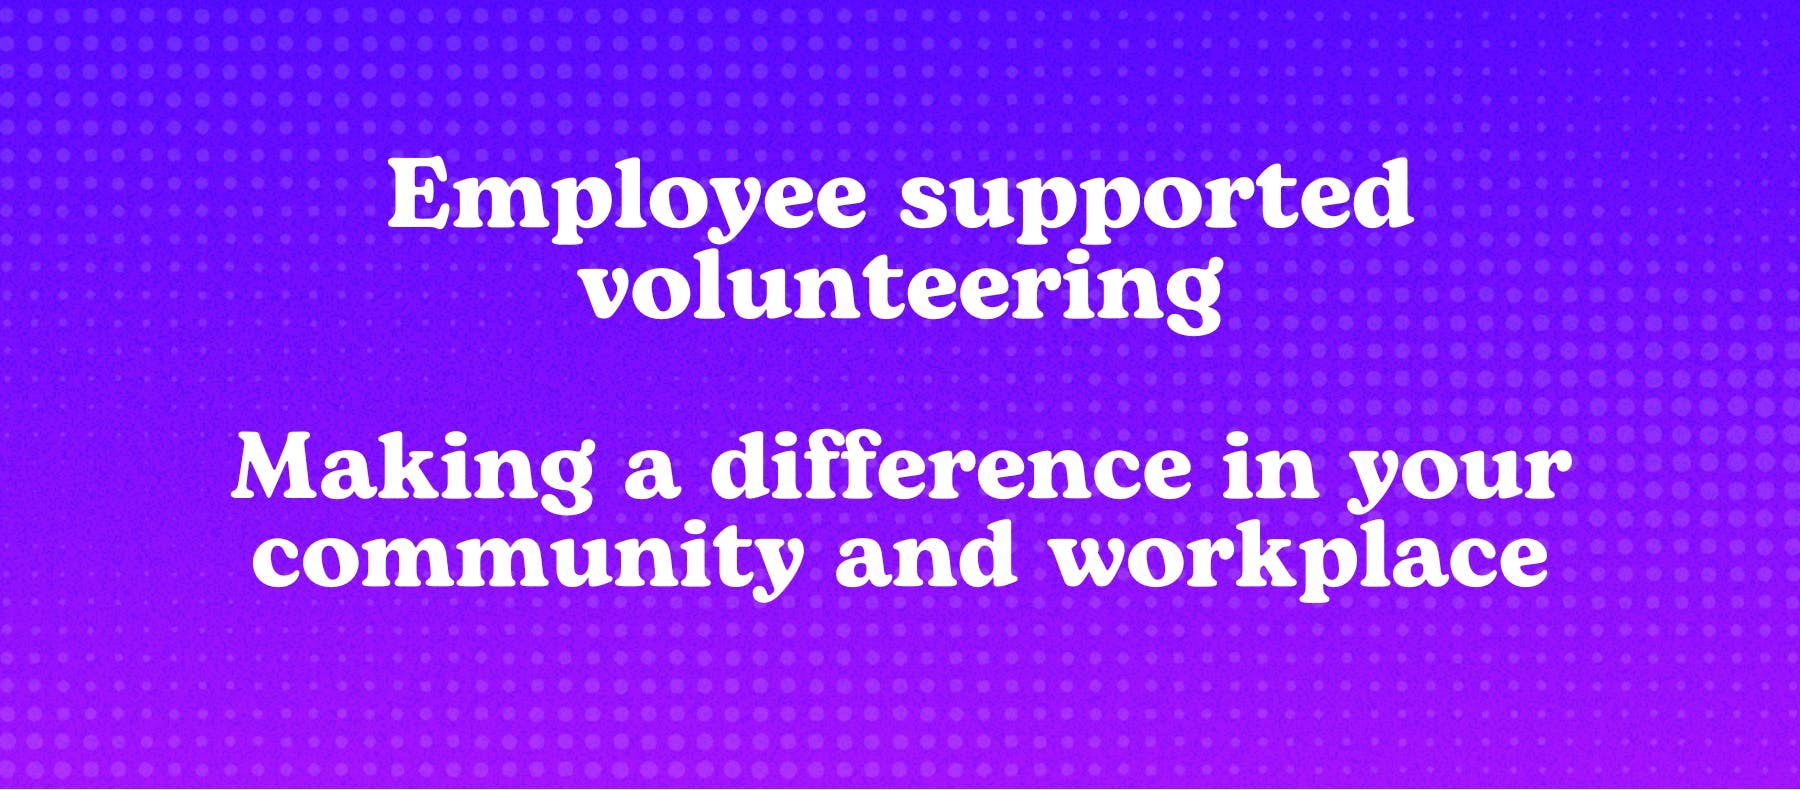 Employee supported volunteering: making a difference in your community and workplace